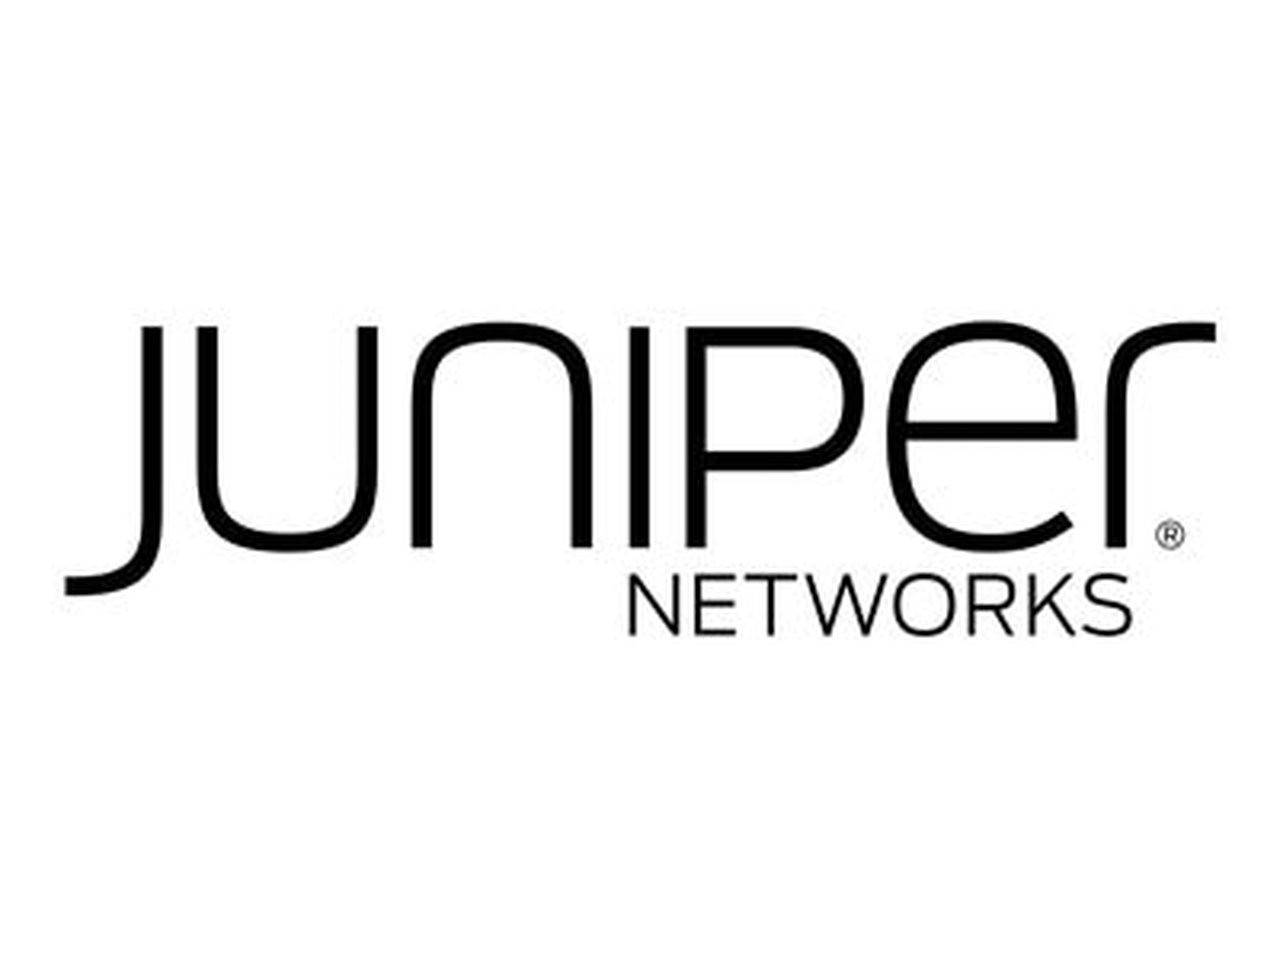 Juniper SRX4100 Services Gateway includes hardware (8x10GE, two DC PSU, four FAN Trays, cables and RMK) and Junos Software Enhanced (Firewall, NAT, IPSec, Routing, MPLS and Application Security)